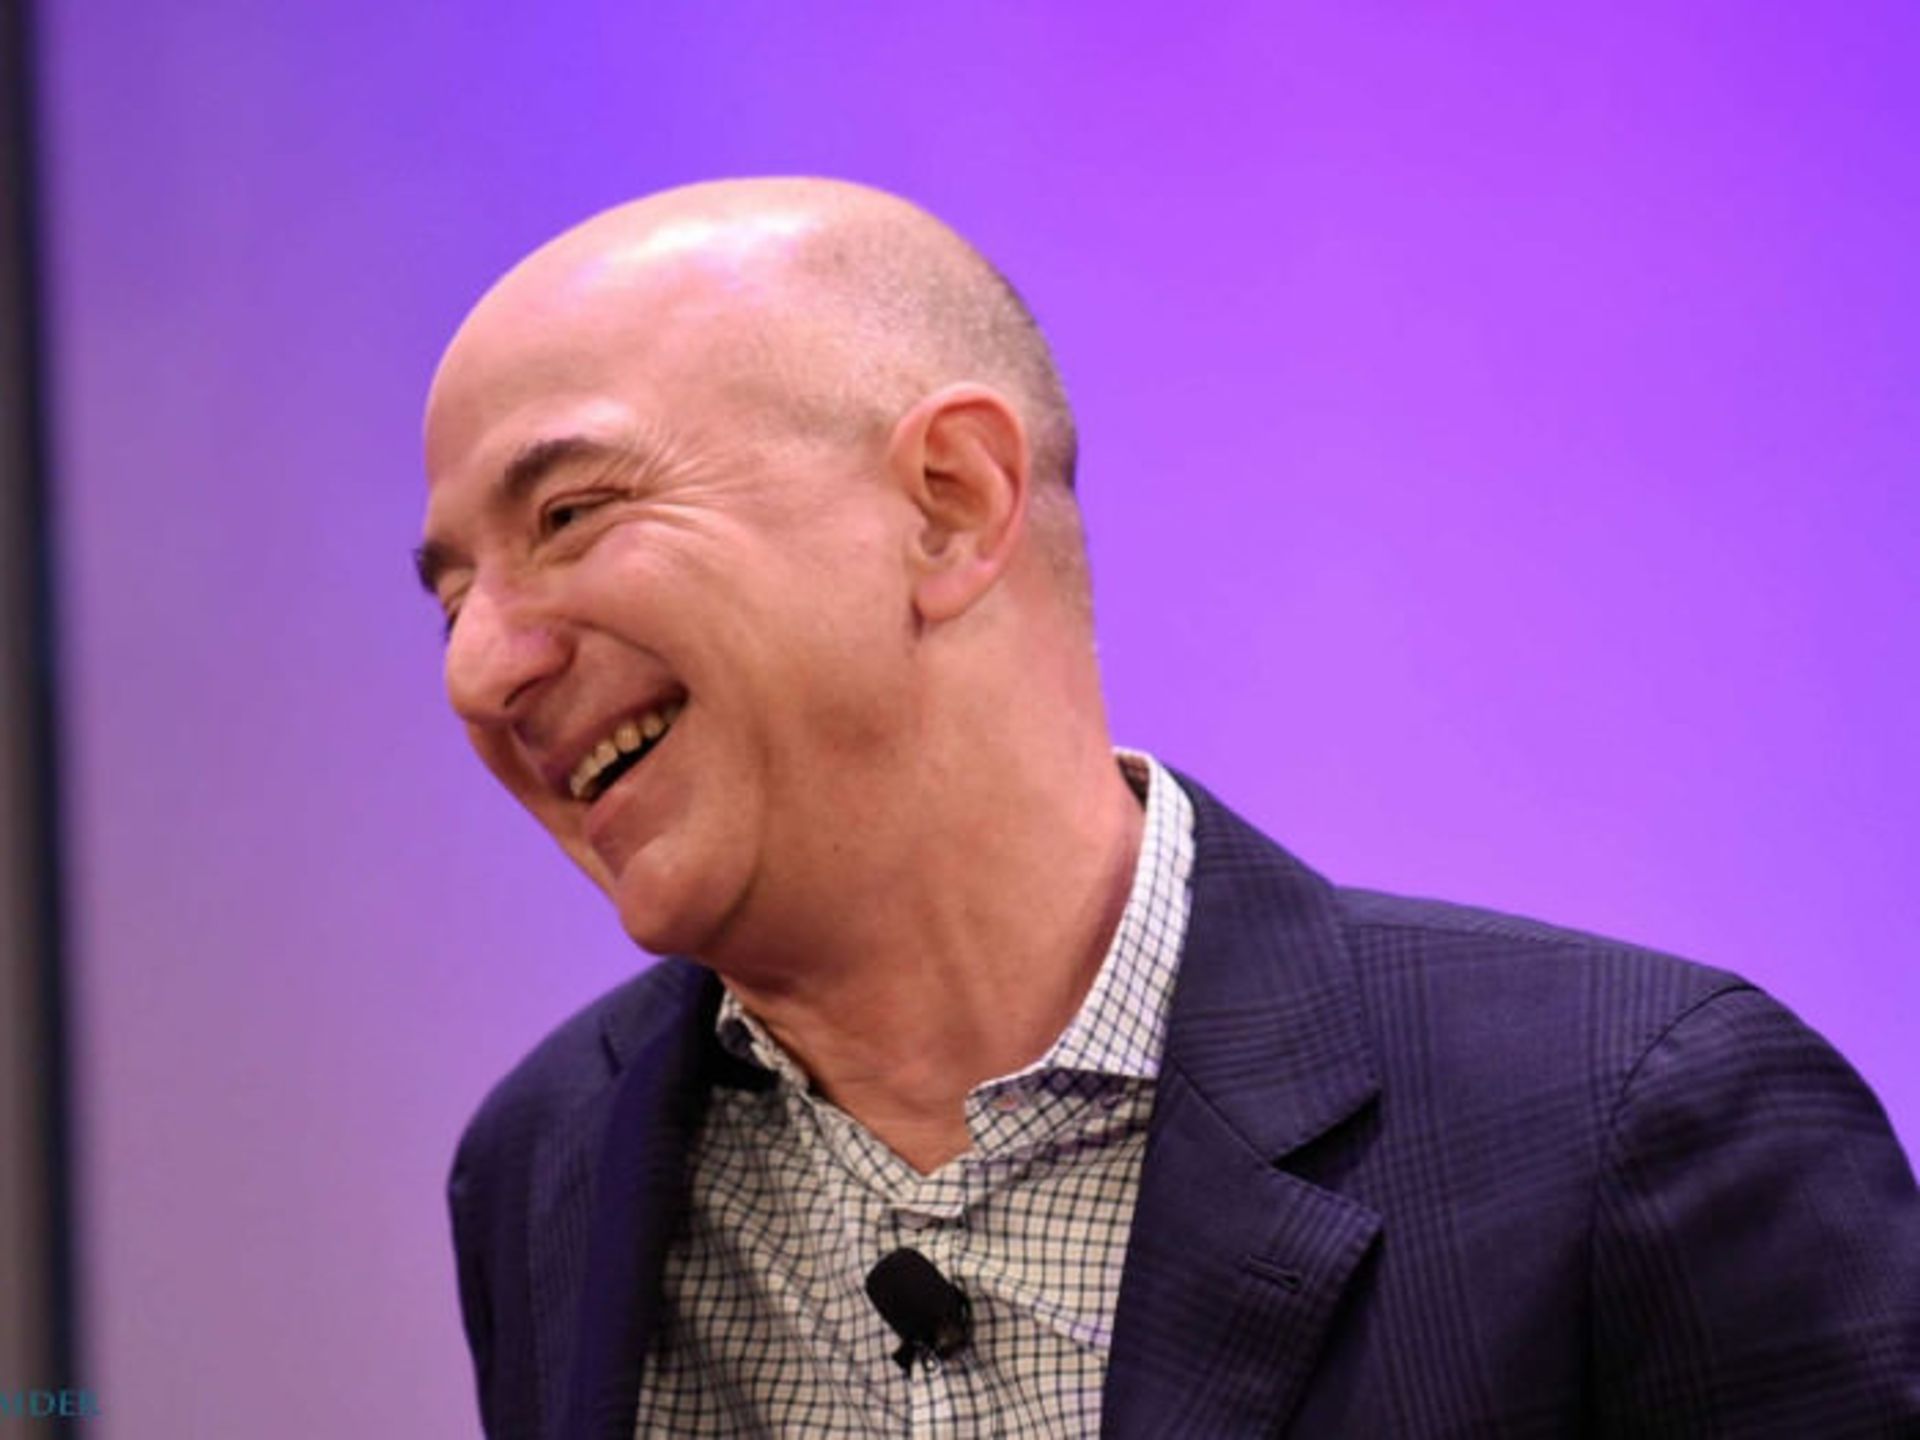 3-jeff-bezos-is-the-founder-and-ceo-of-amazon